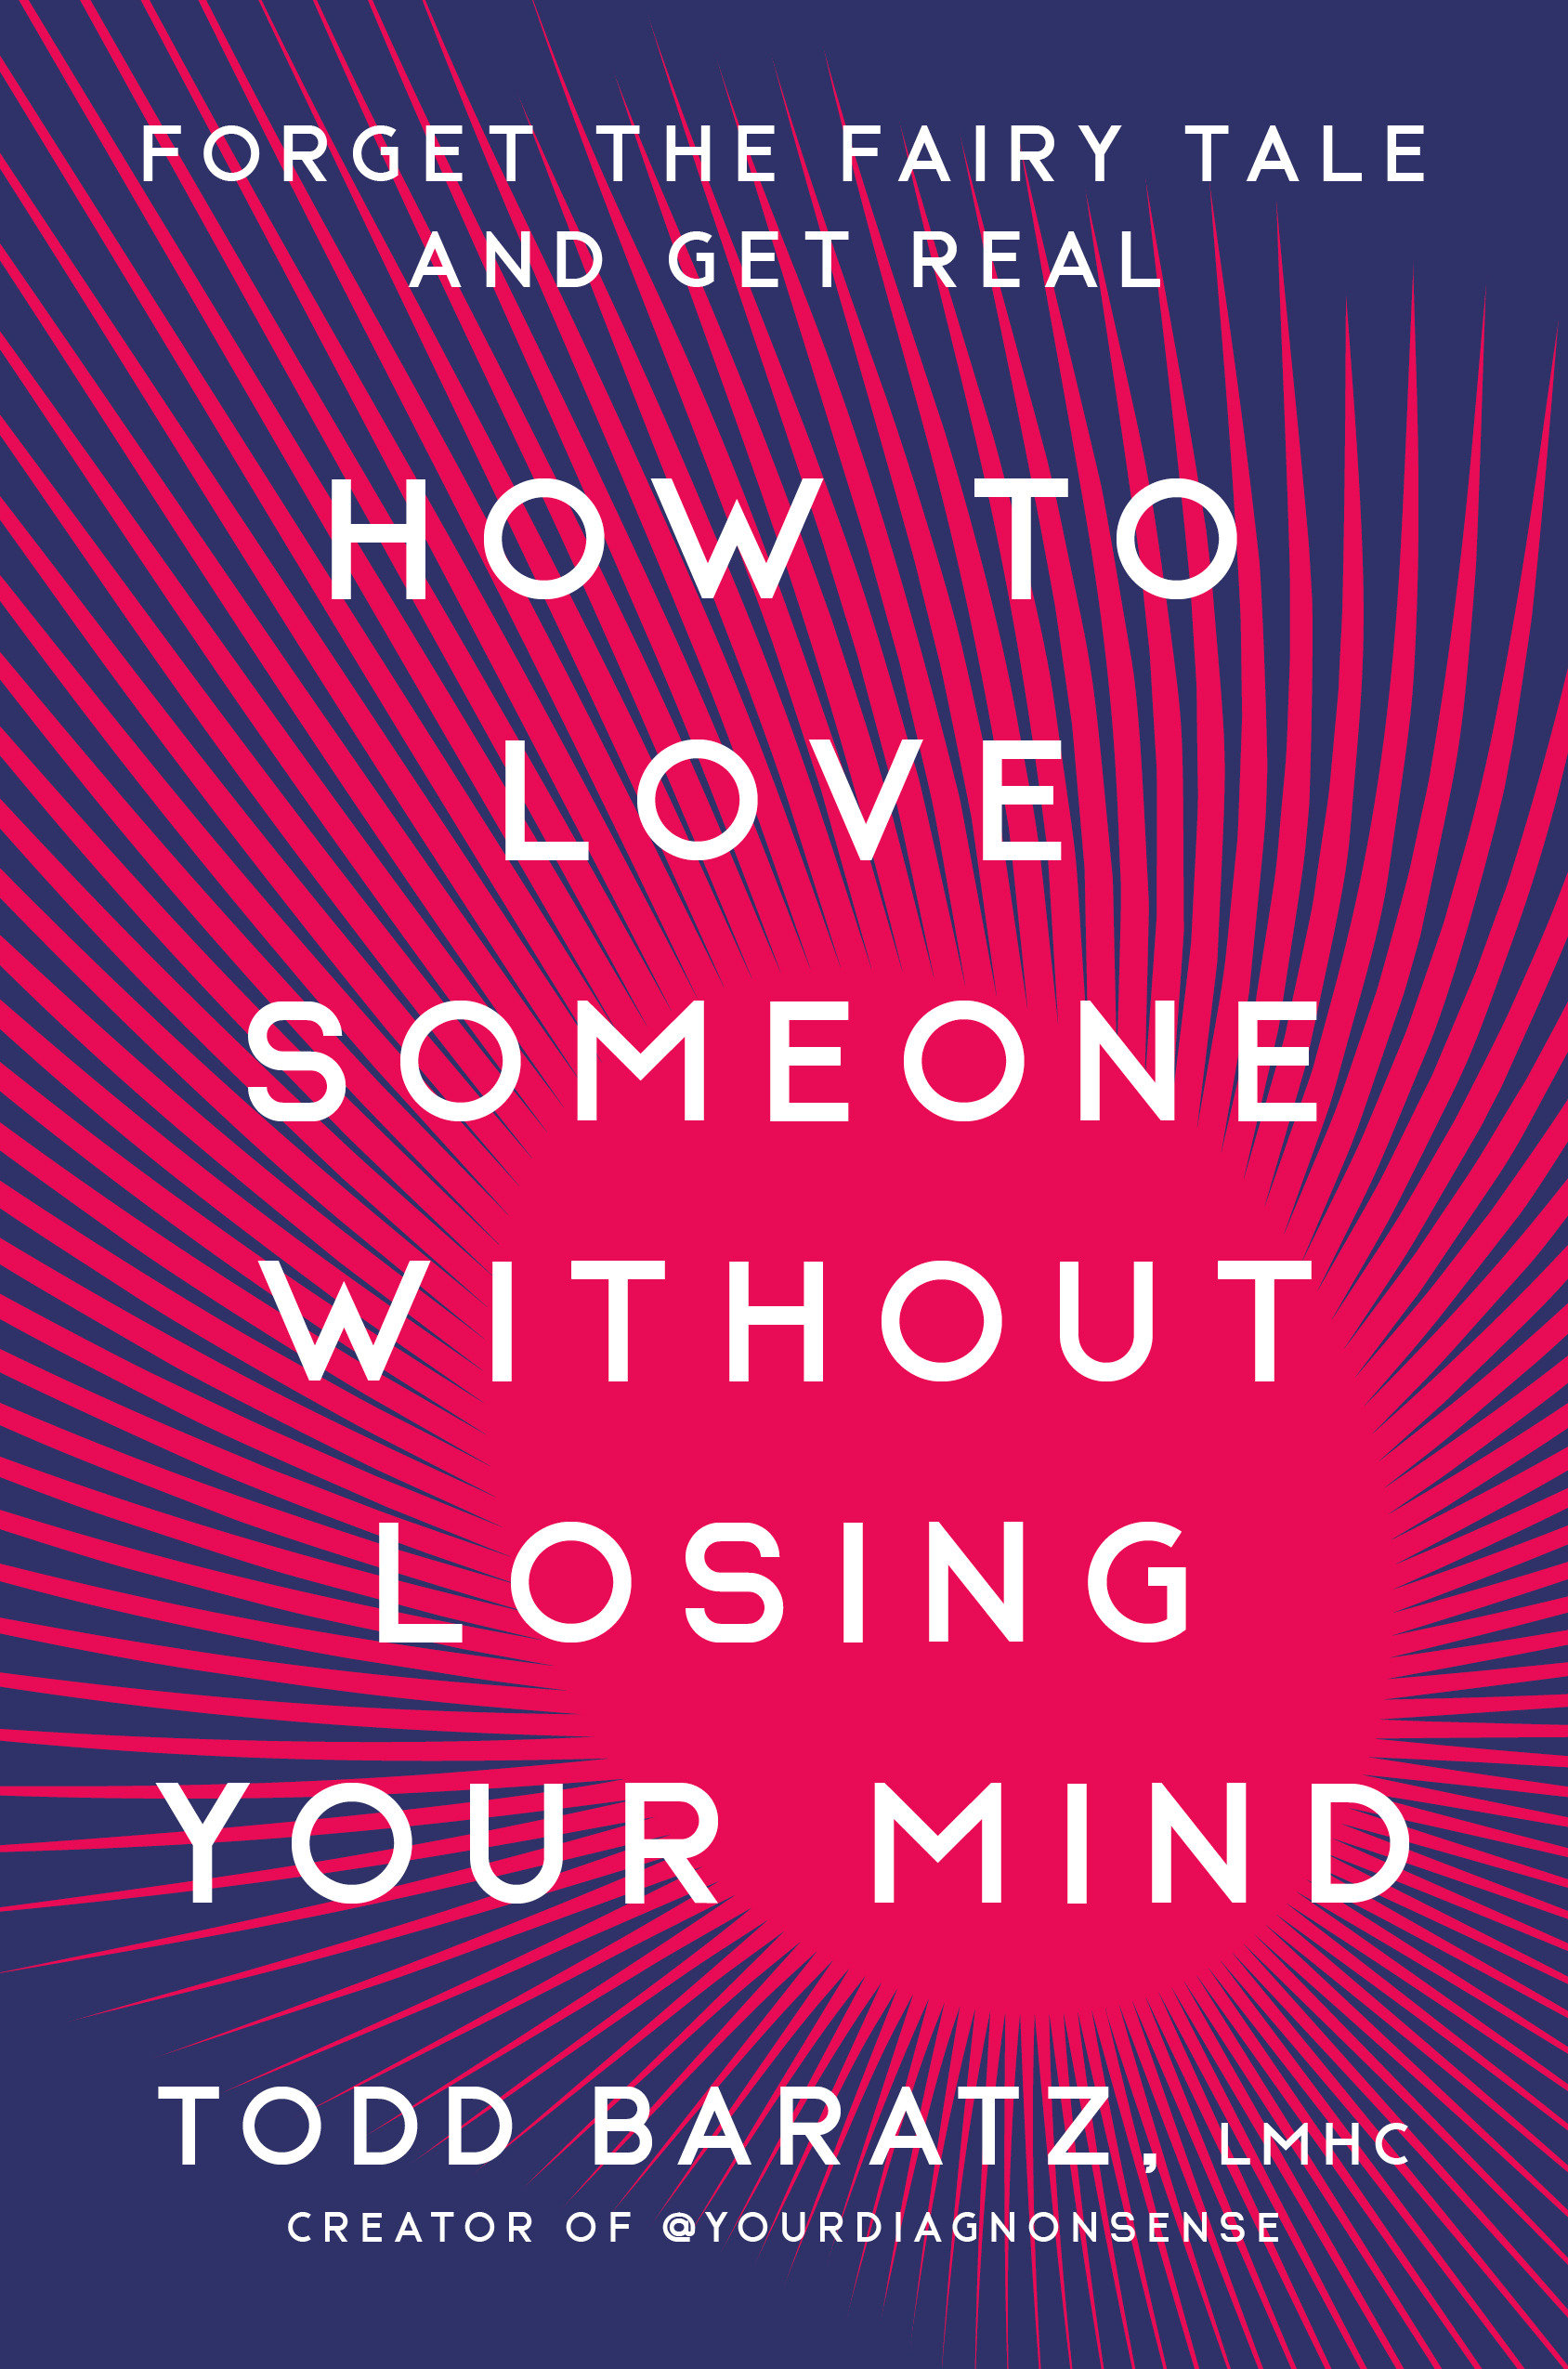 How To Love Someone Without Losing Your Mind (Hardcover Book)